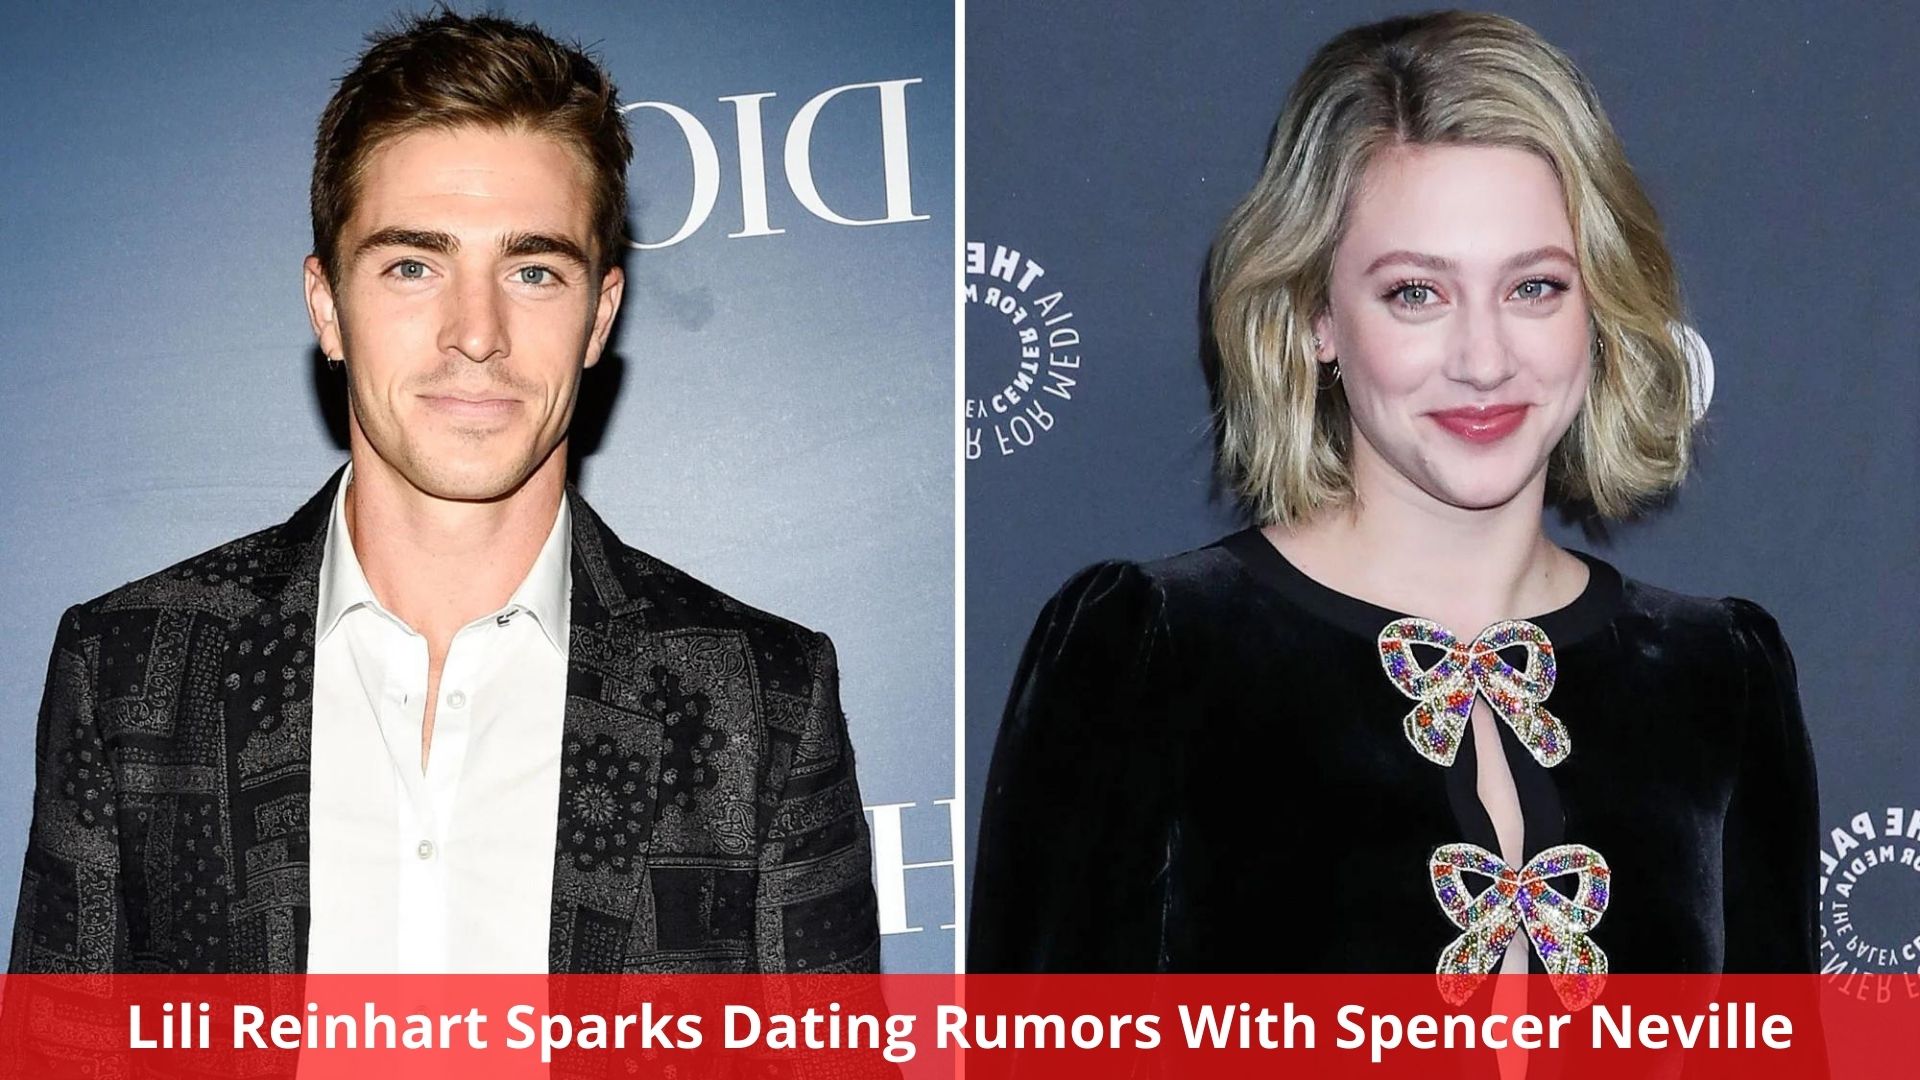 Lili Reinhart Sparks Dating Rumors With Spencer Neville - Everything We Know!